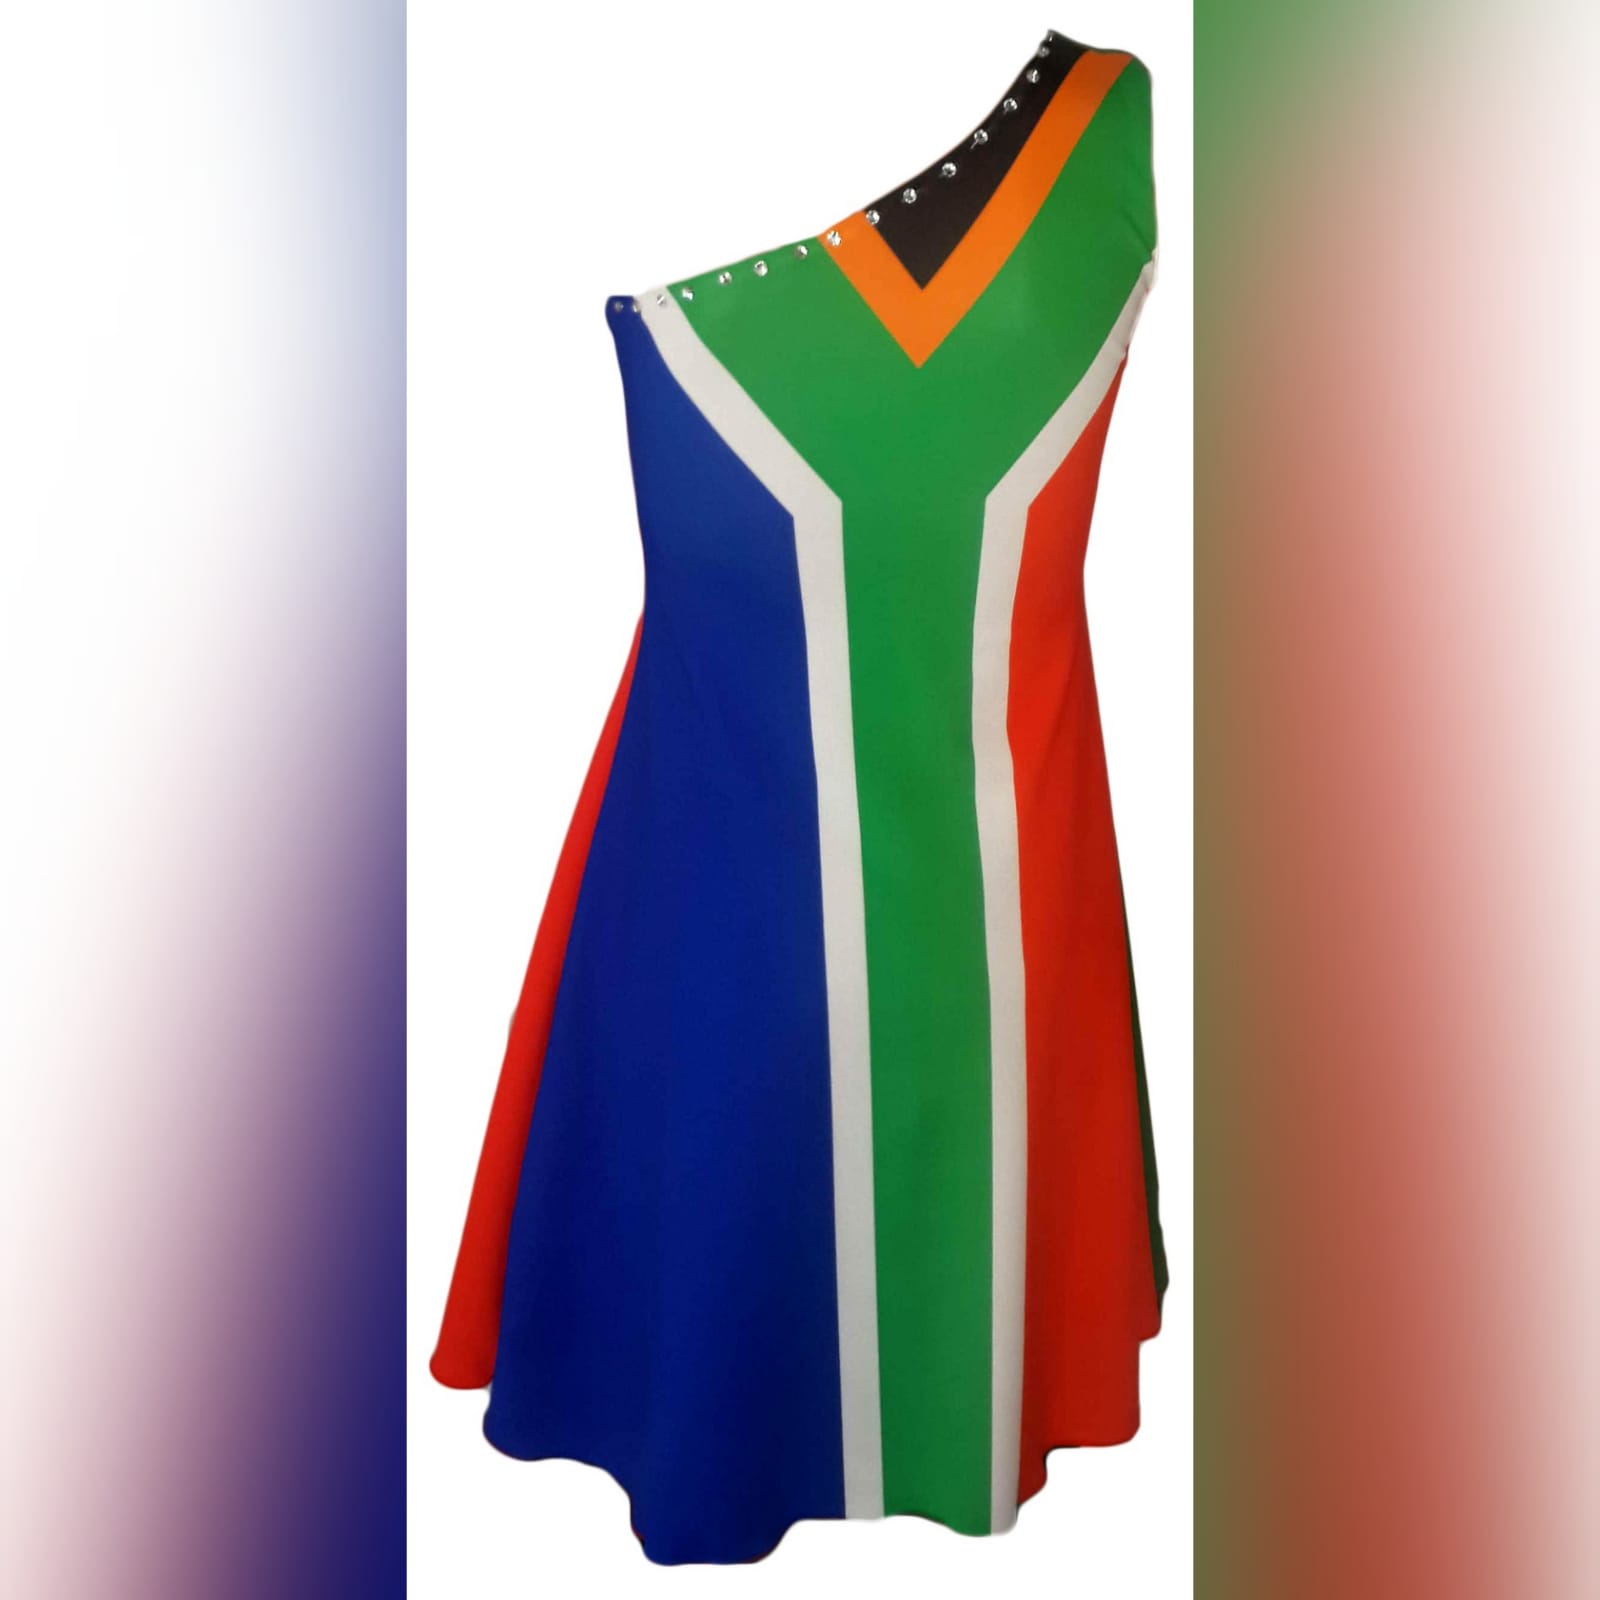 Portuguese flag and south african flag dress 7 single shoulder dress with the portuguese flag in the front and the south african flag at the back. Bead detailing on the front and the back. Worn for heritage day. She won a prize for best dressed.